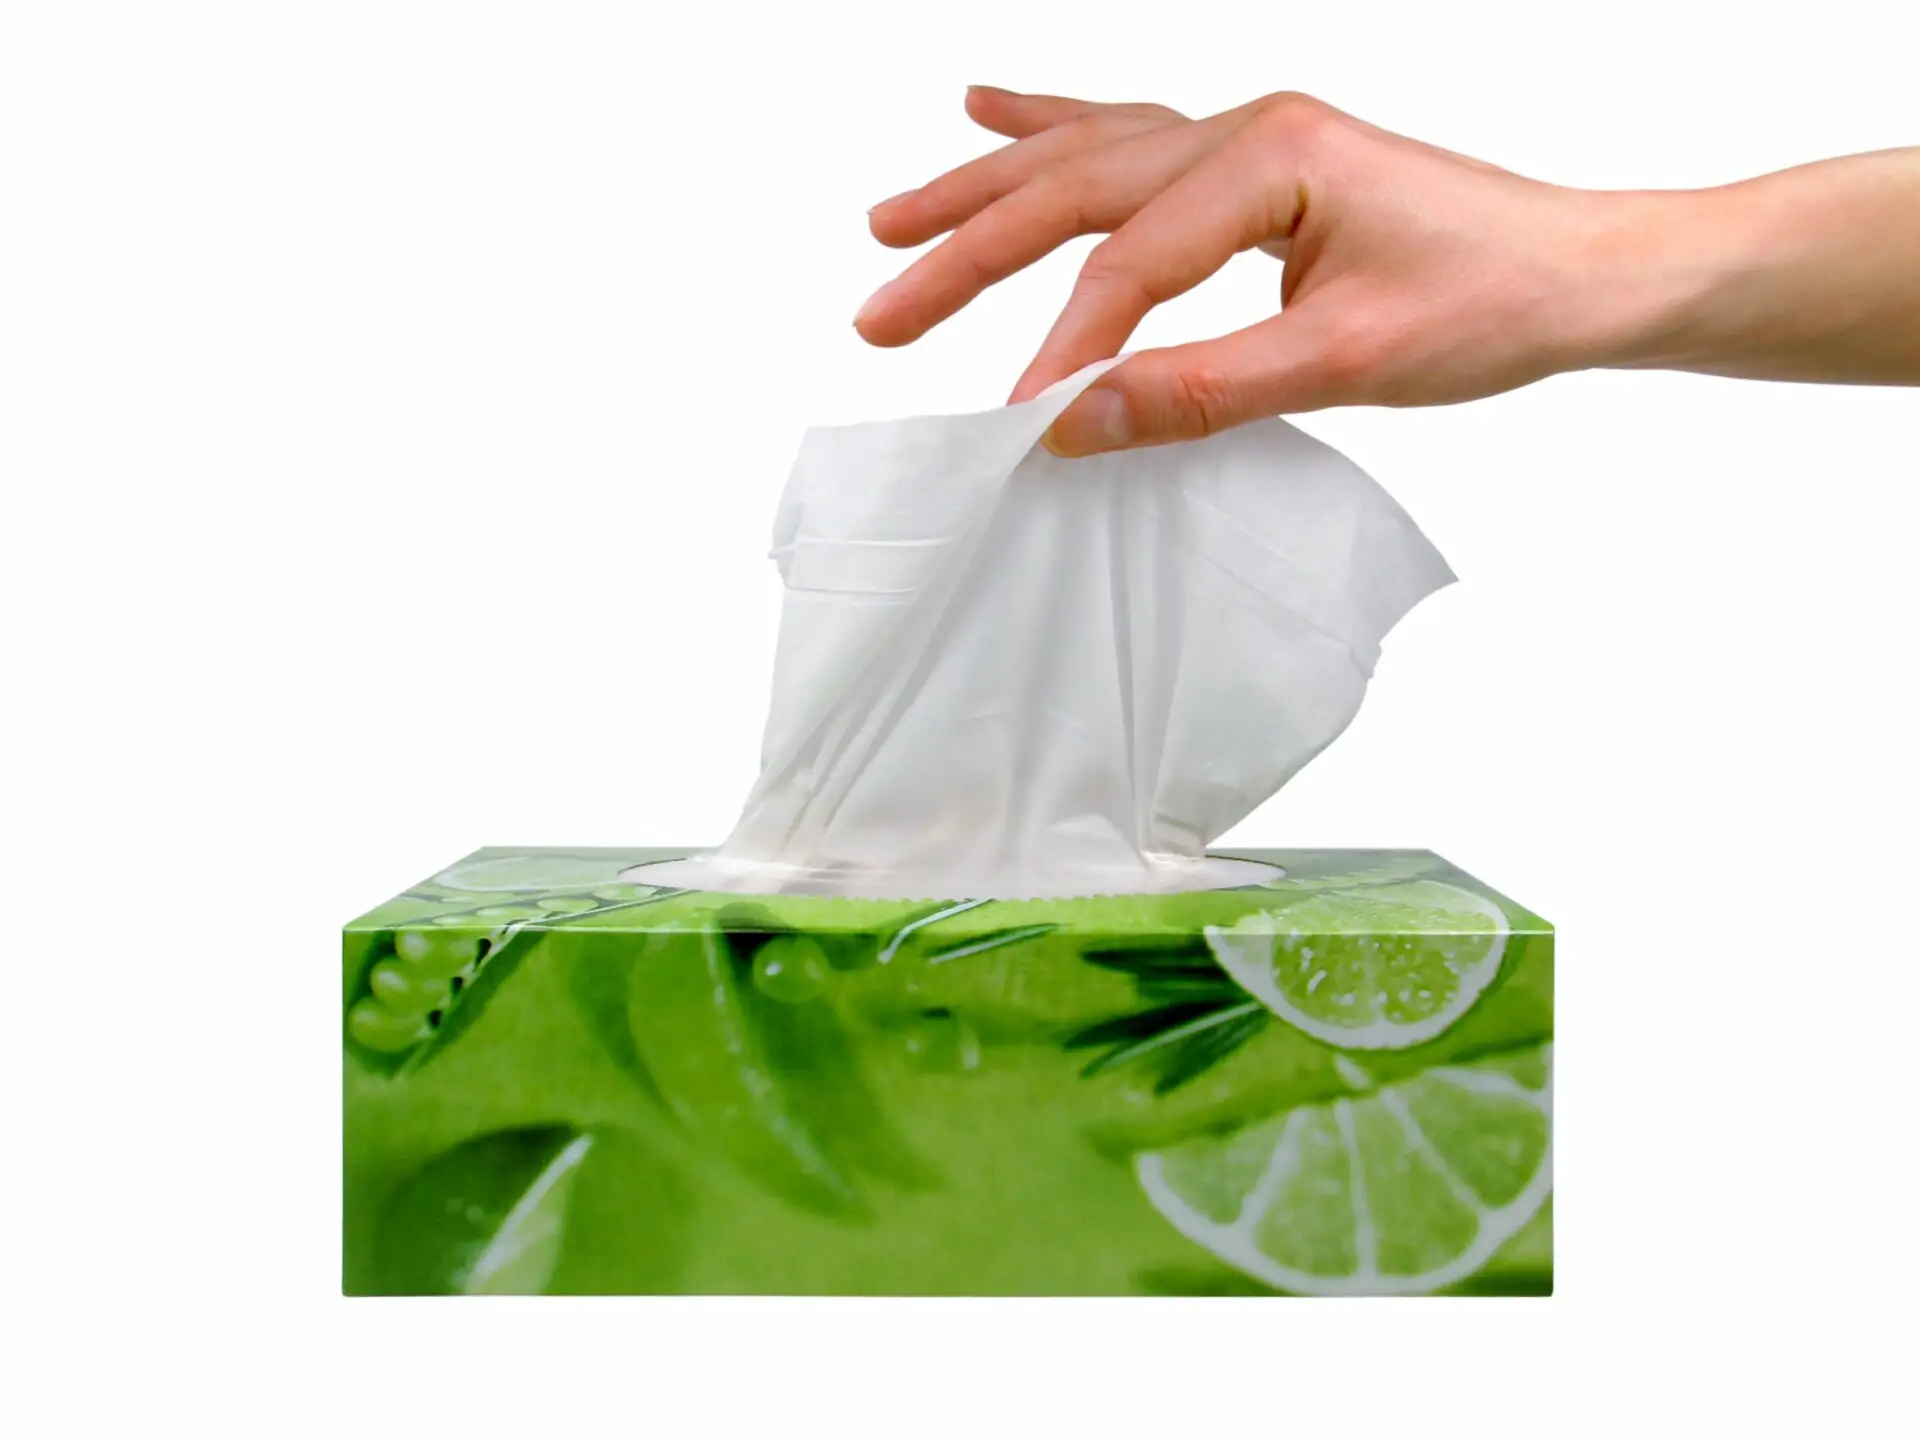 Are Tissues Eco-Friendly? 11 Important Facts (You Should Know)